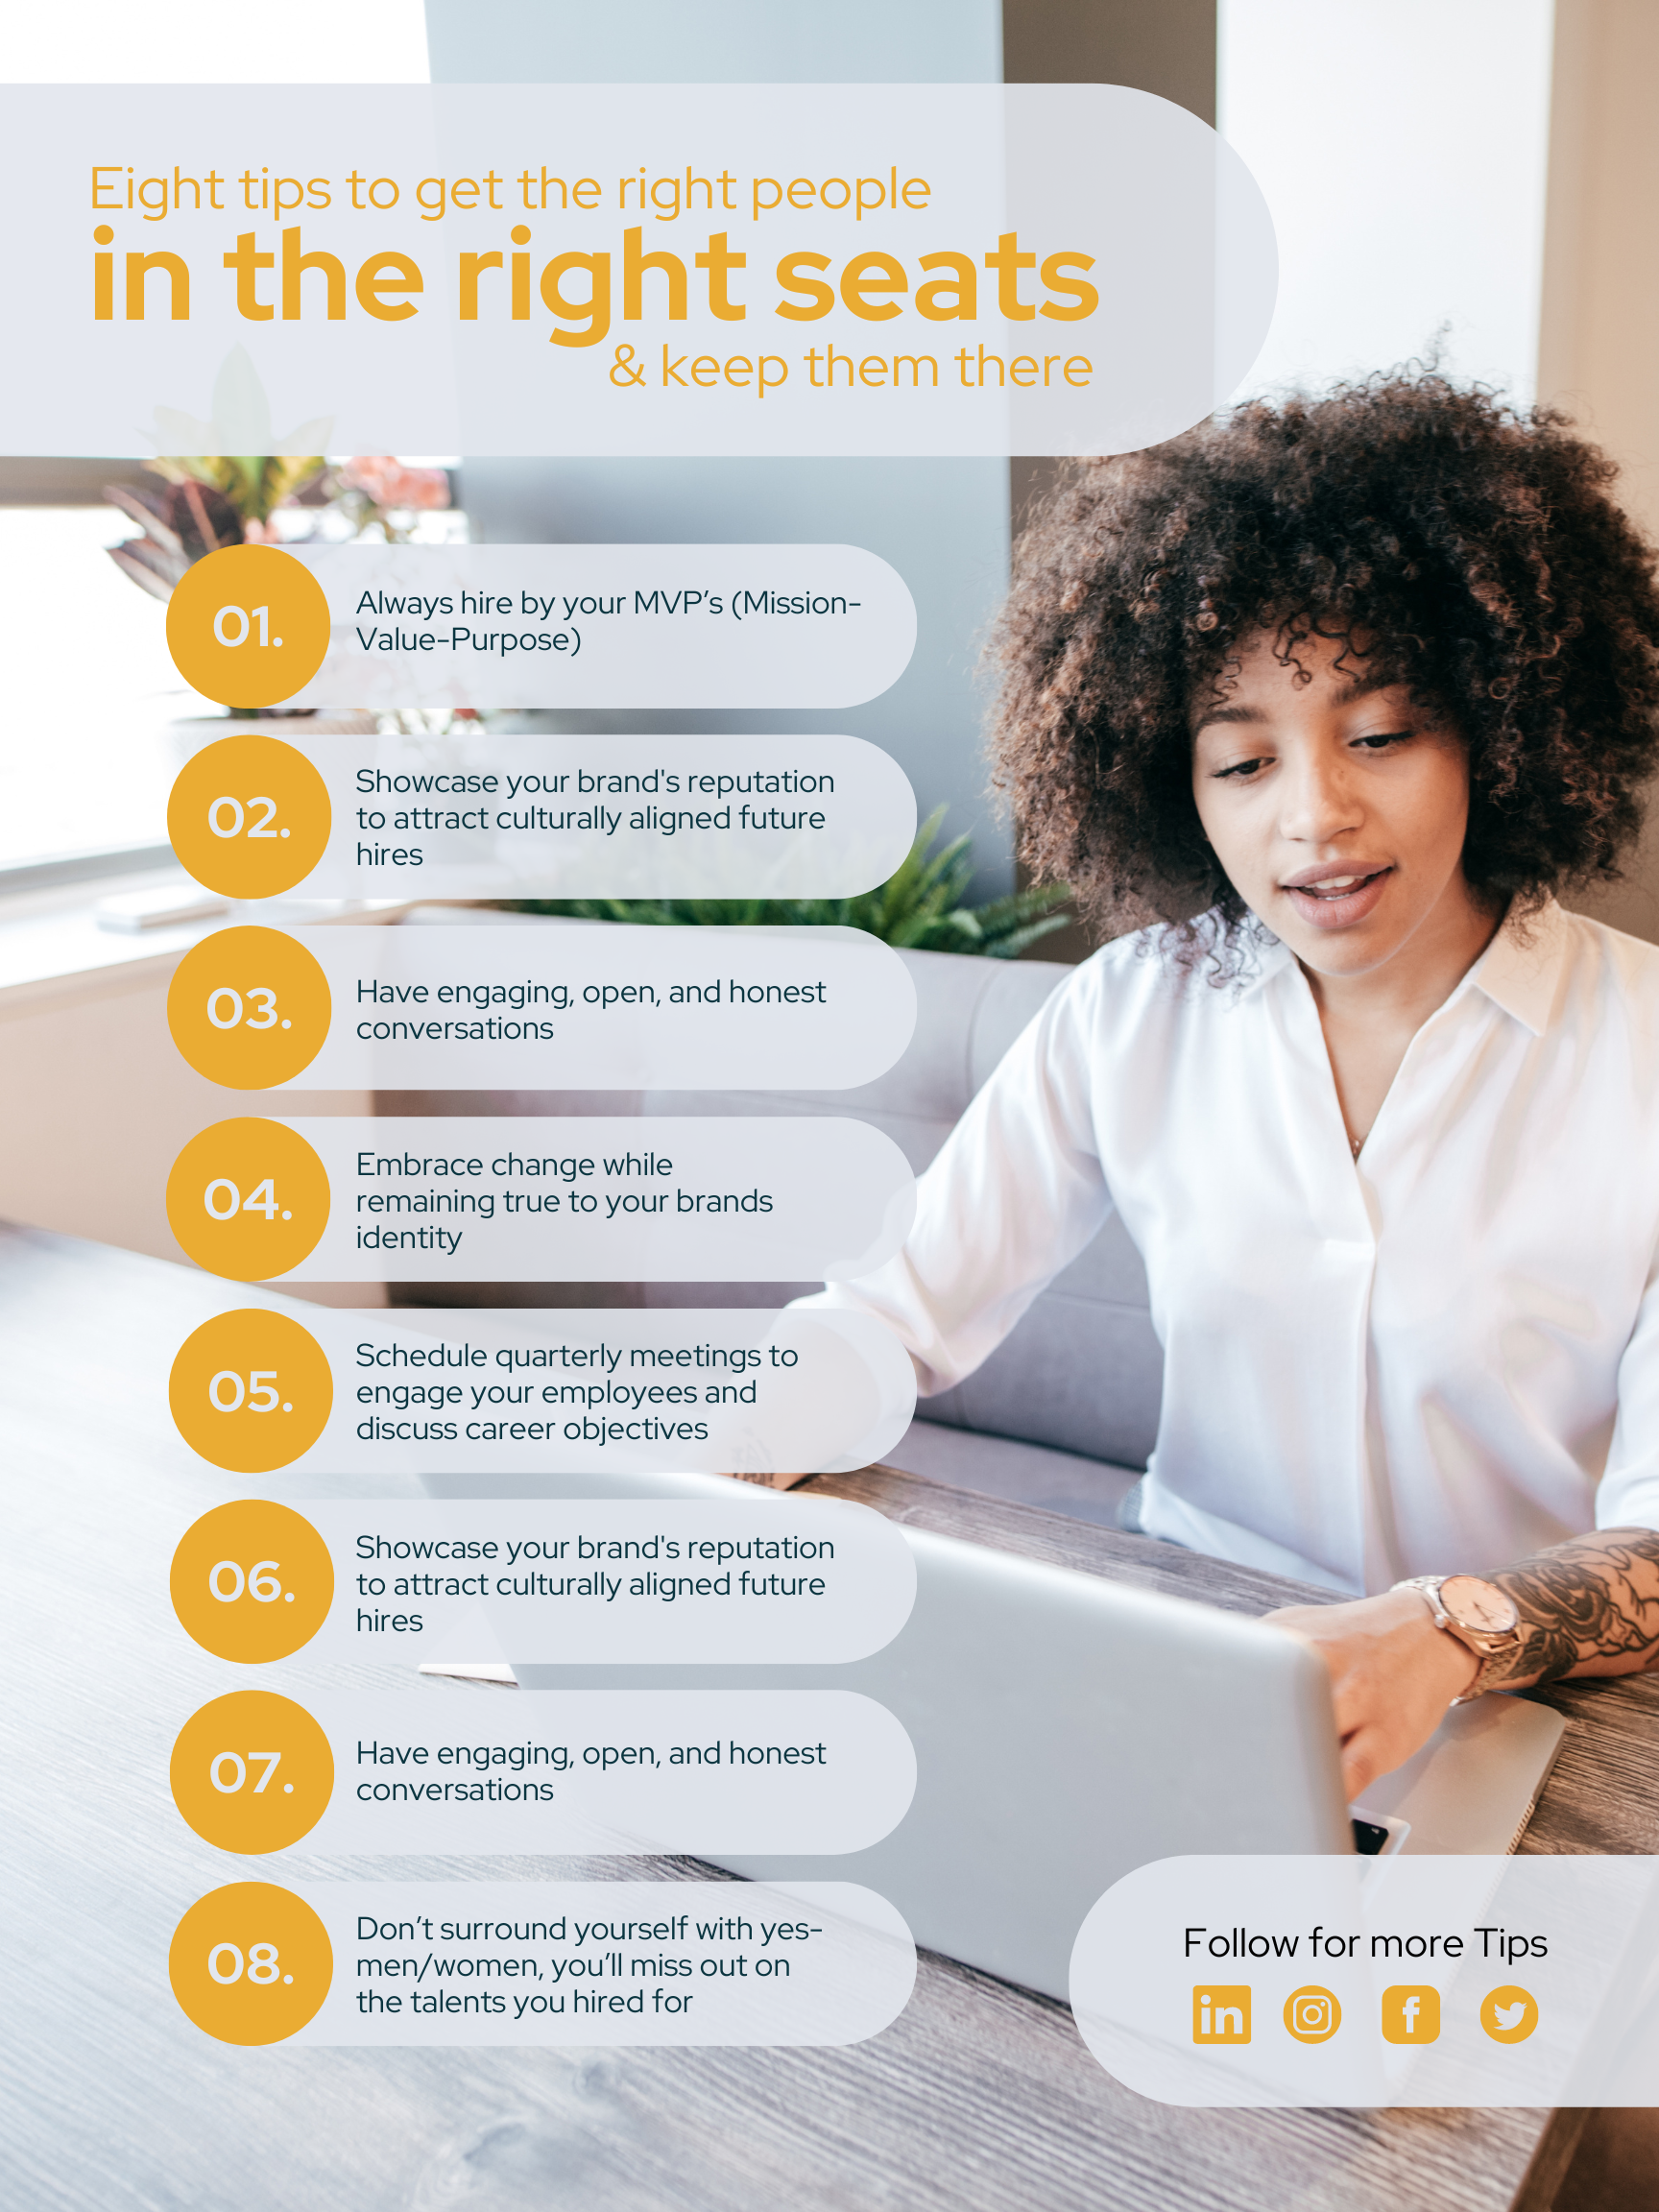 8 Tips to get the right people in the right seats